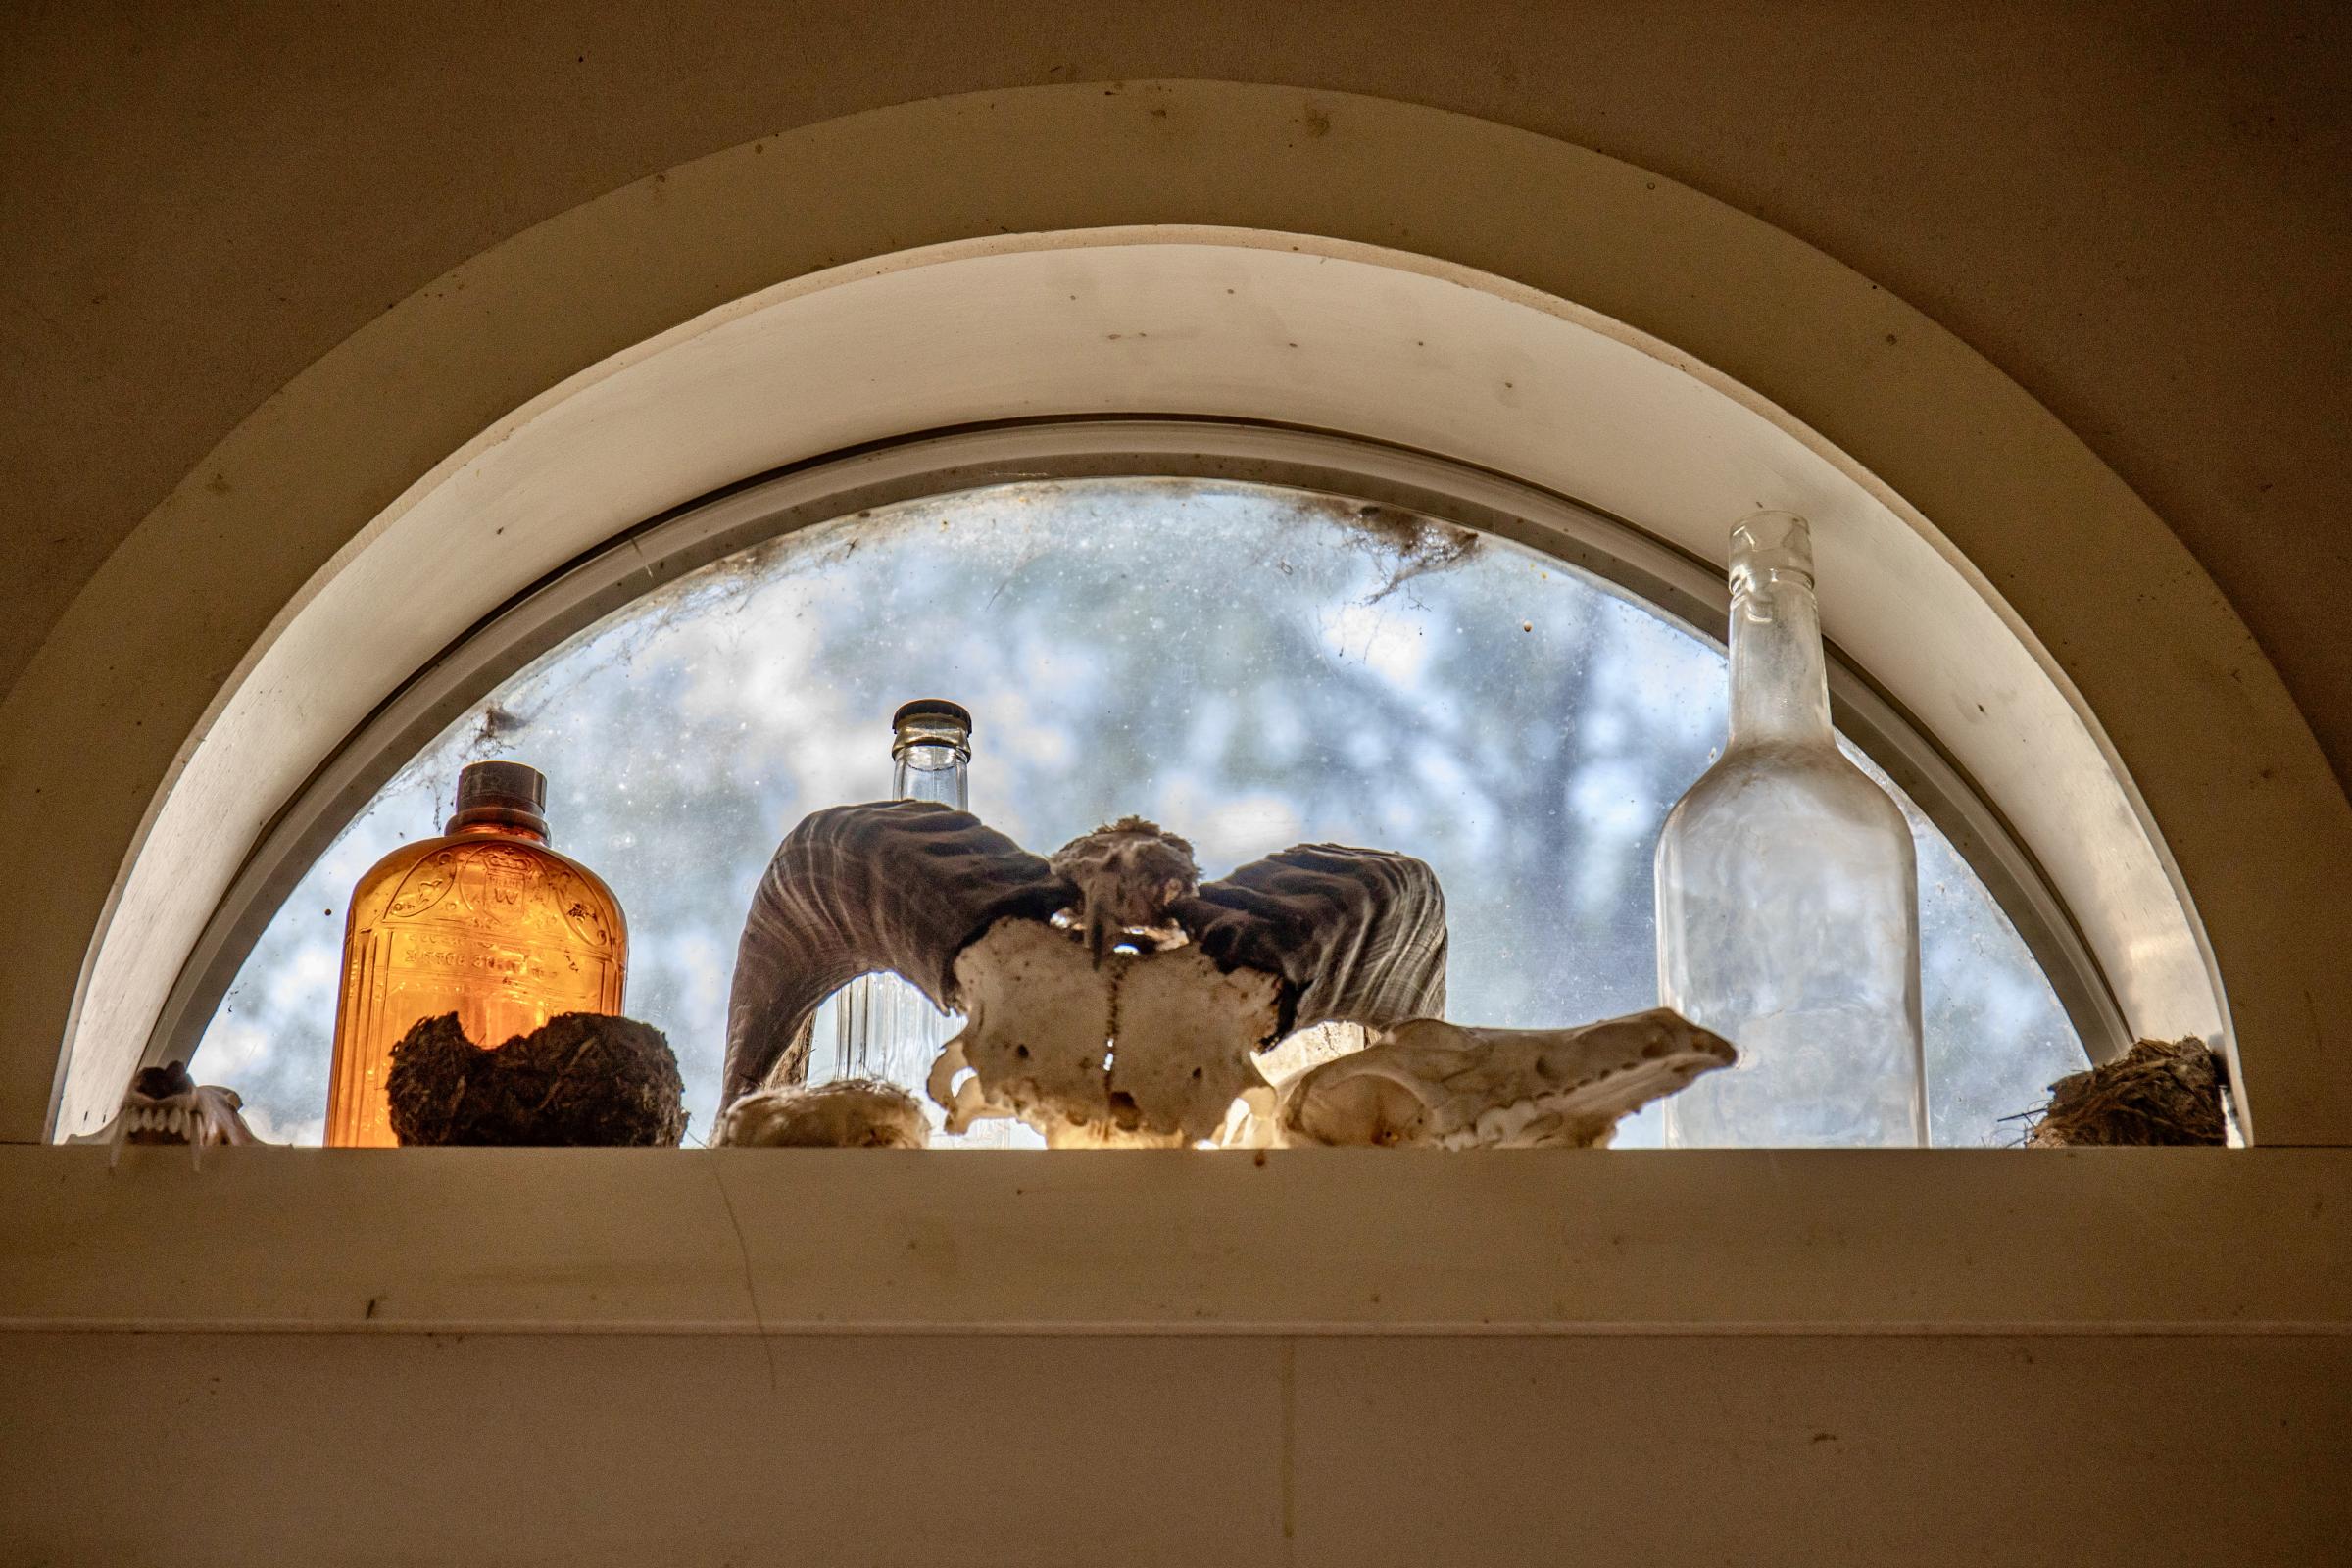 Crisis on the Rio Grande - A collection of items in Schoonover&rsquo;s kitchen window. (Photo by Diana Cervantes for...